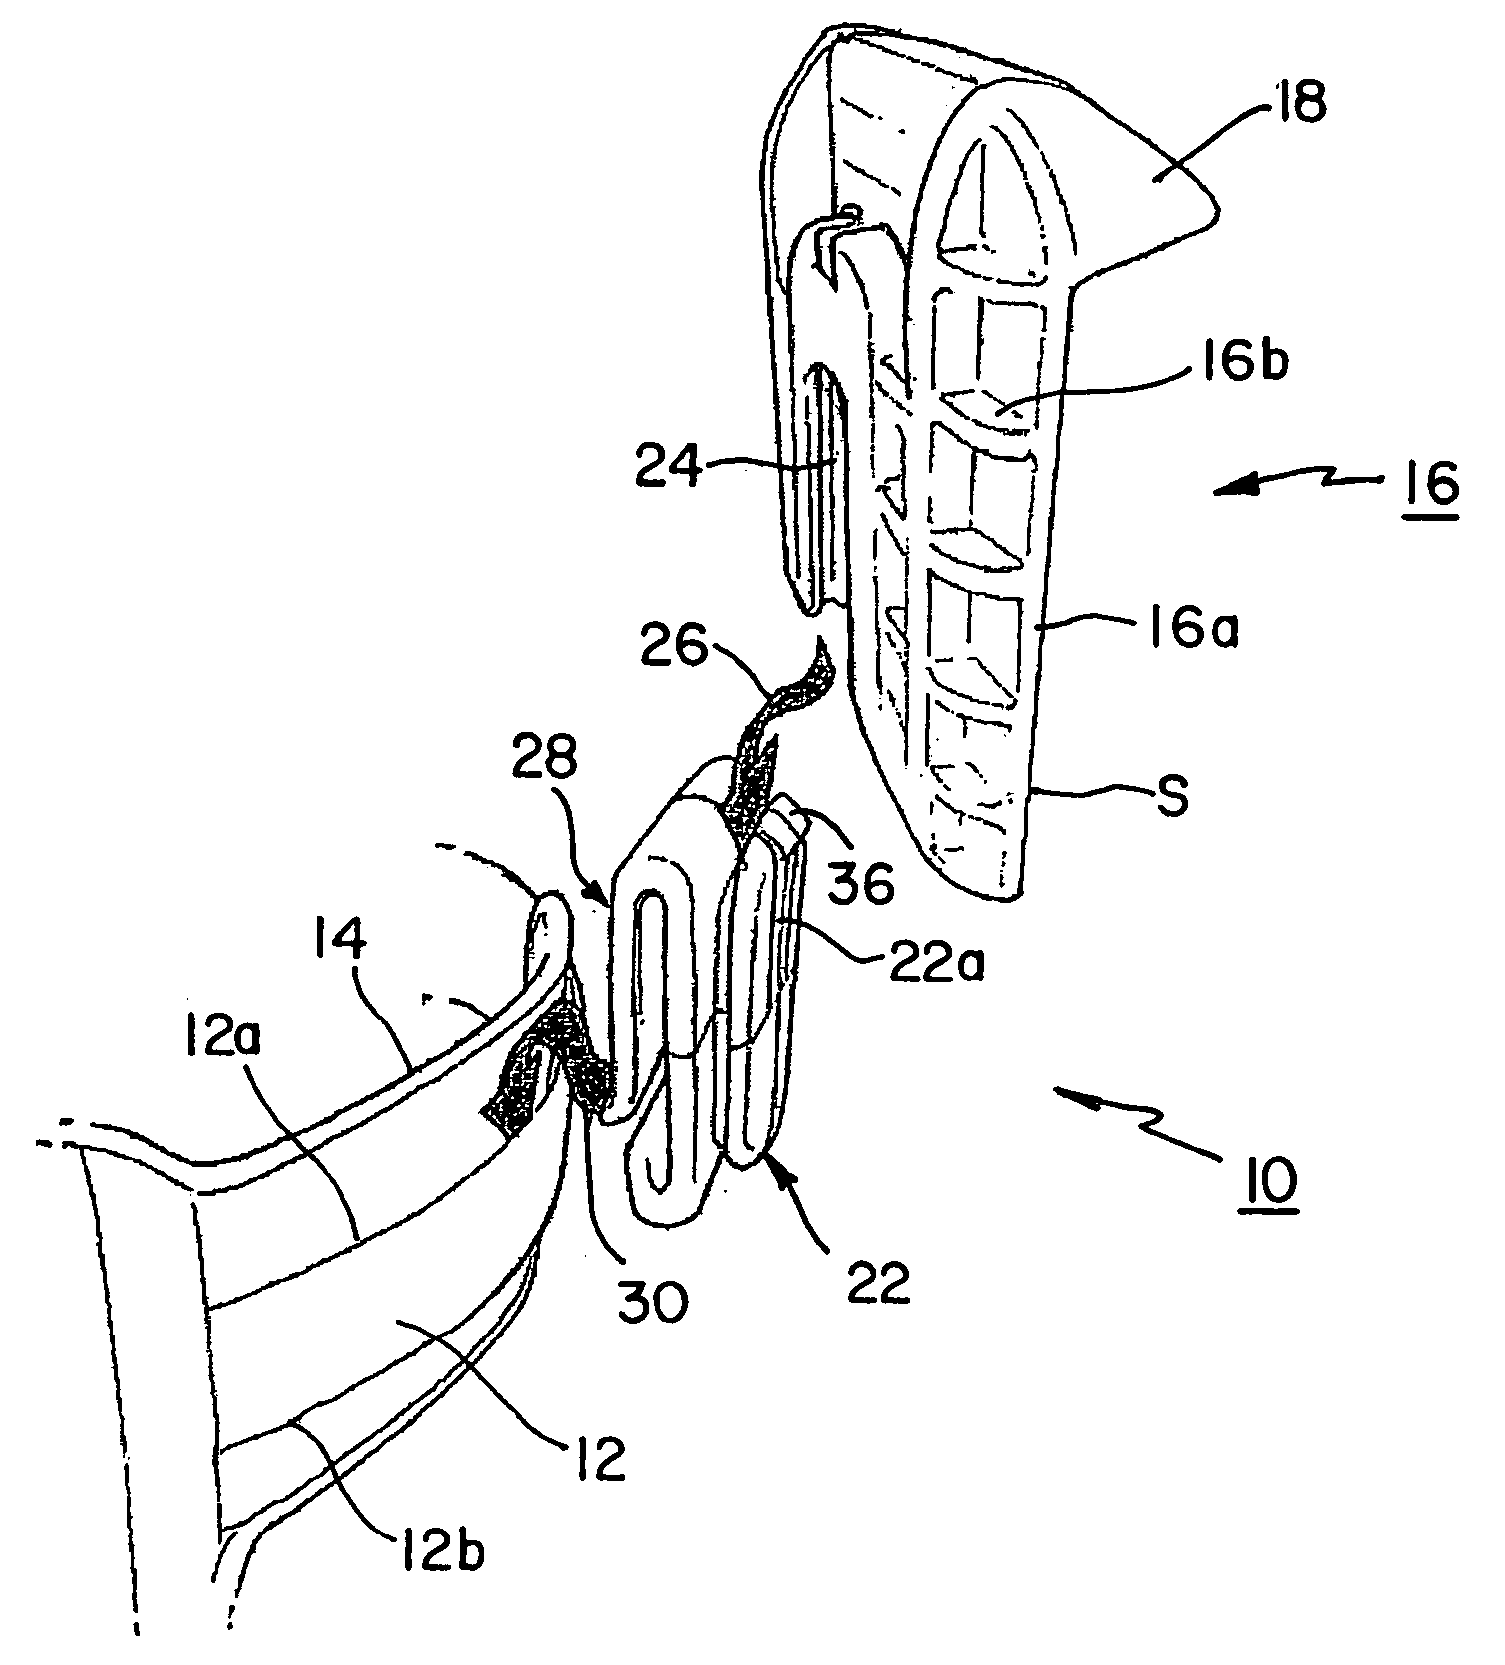 Retainer for detachably attaching an accessory to a utility belt